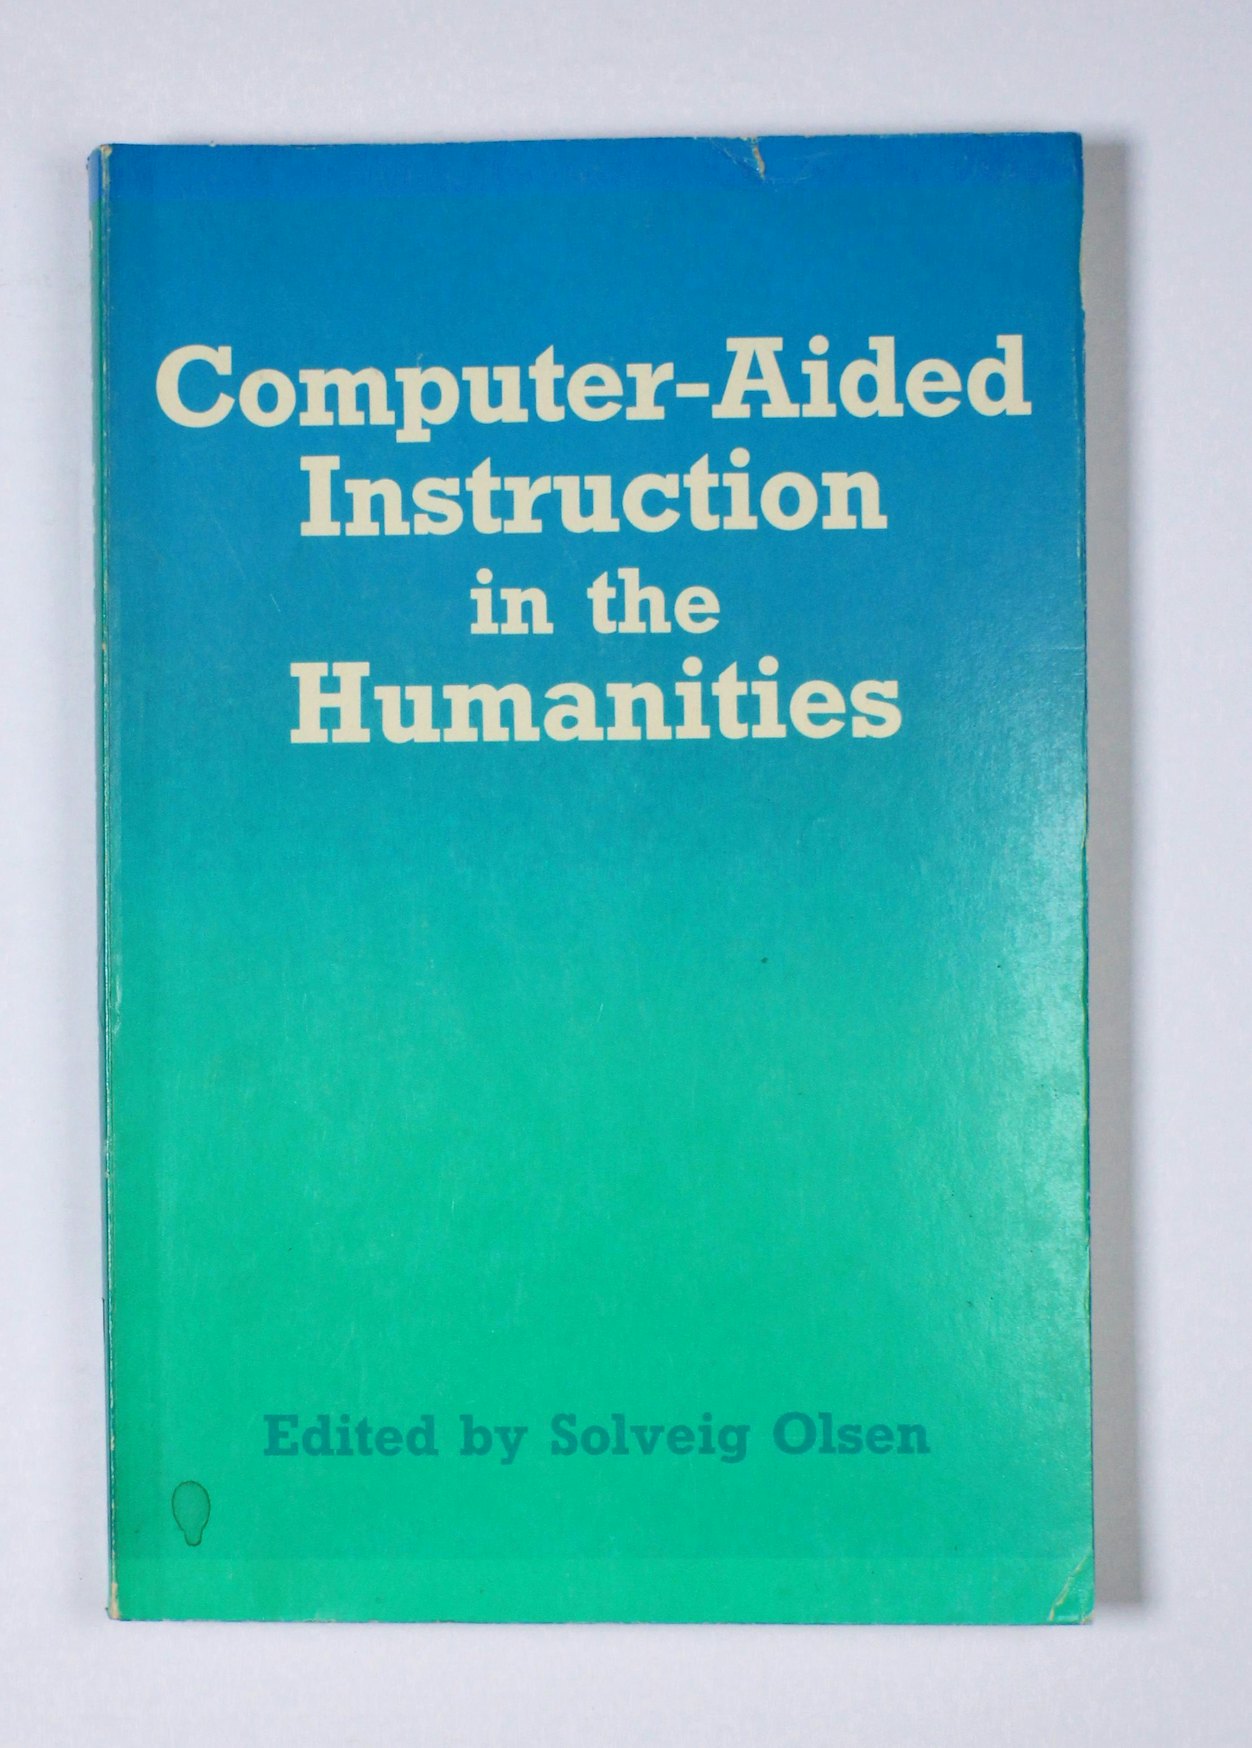 Computer-Aided Instruction in the Humanities